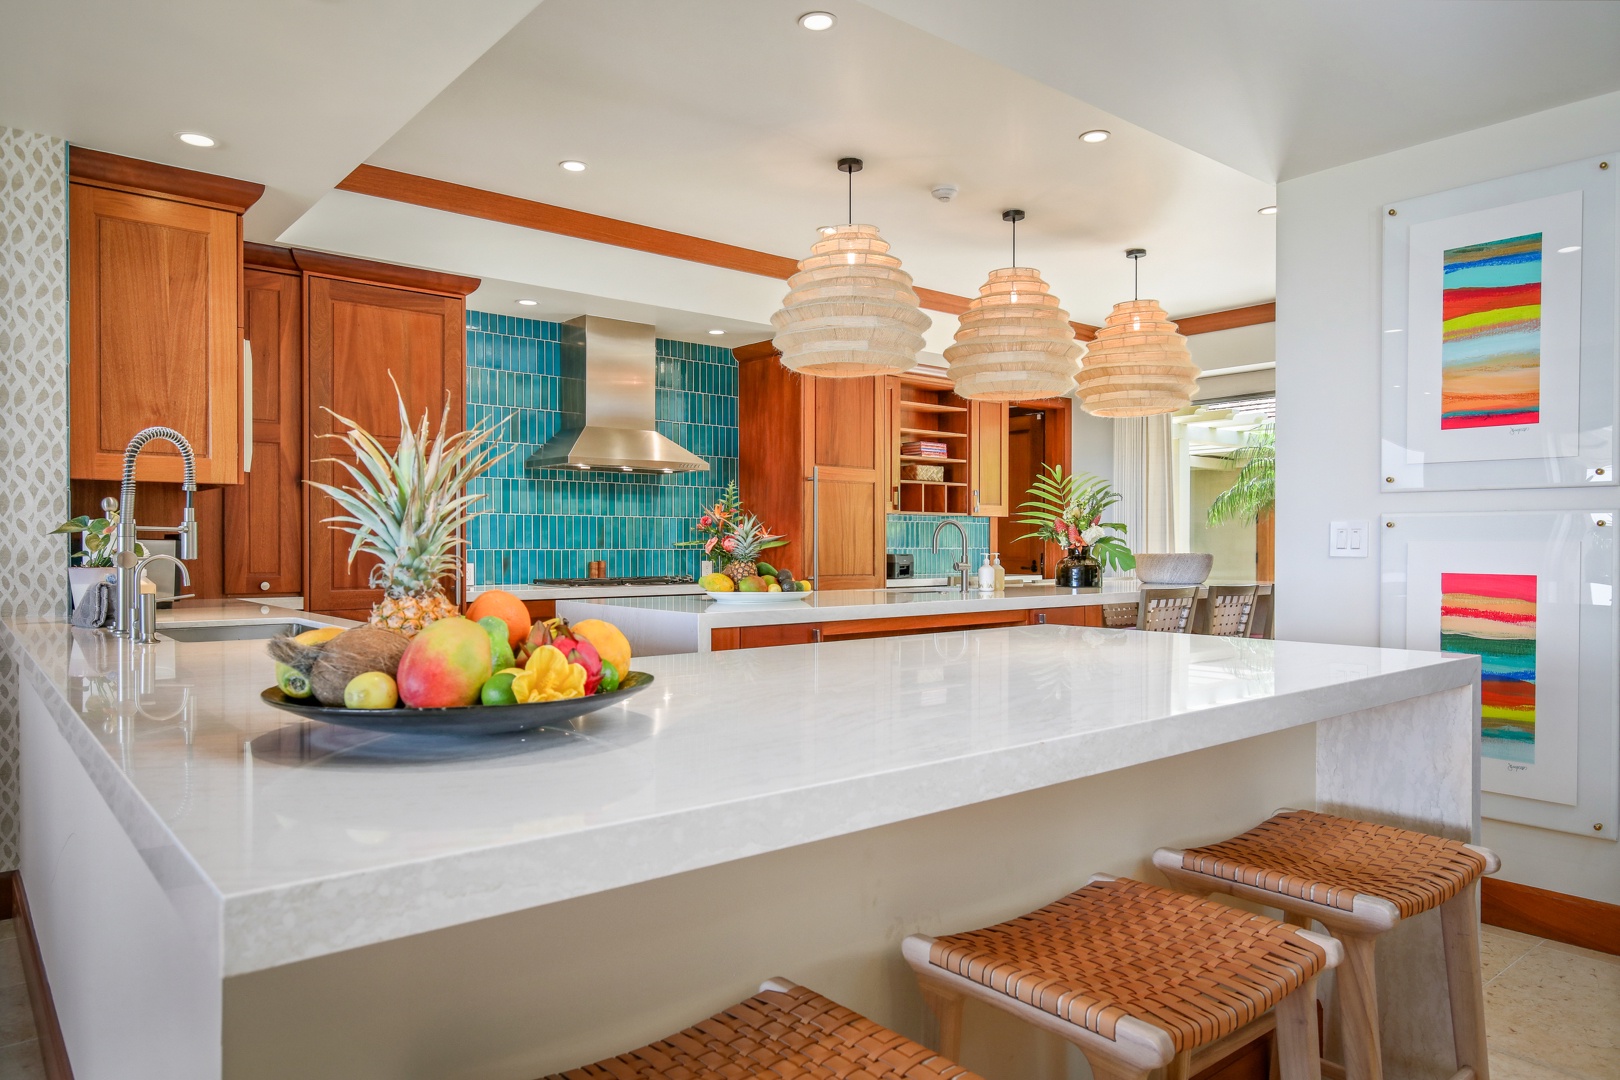 Kailua Kona Vacation Rentals, 4BD Hainoa Estate (122) at Four Seasons Resort at Hualalai - Top tier appliances throughout, this generous kitchen is the perfect hub for this flawless home.